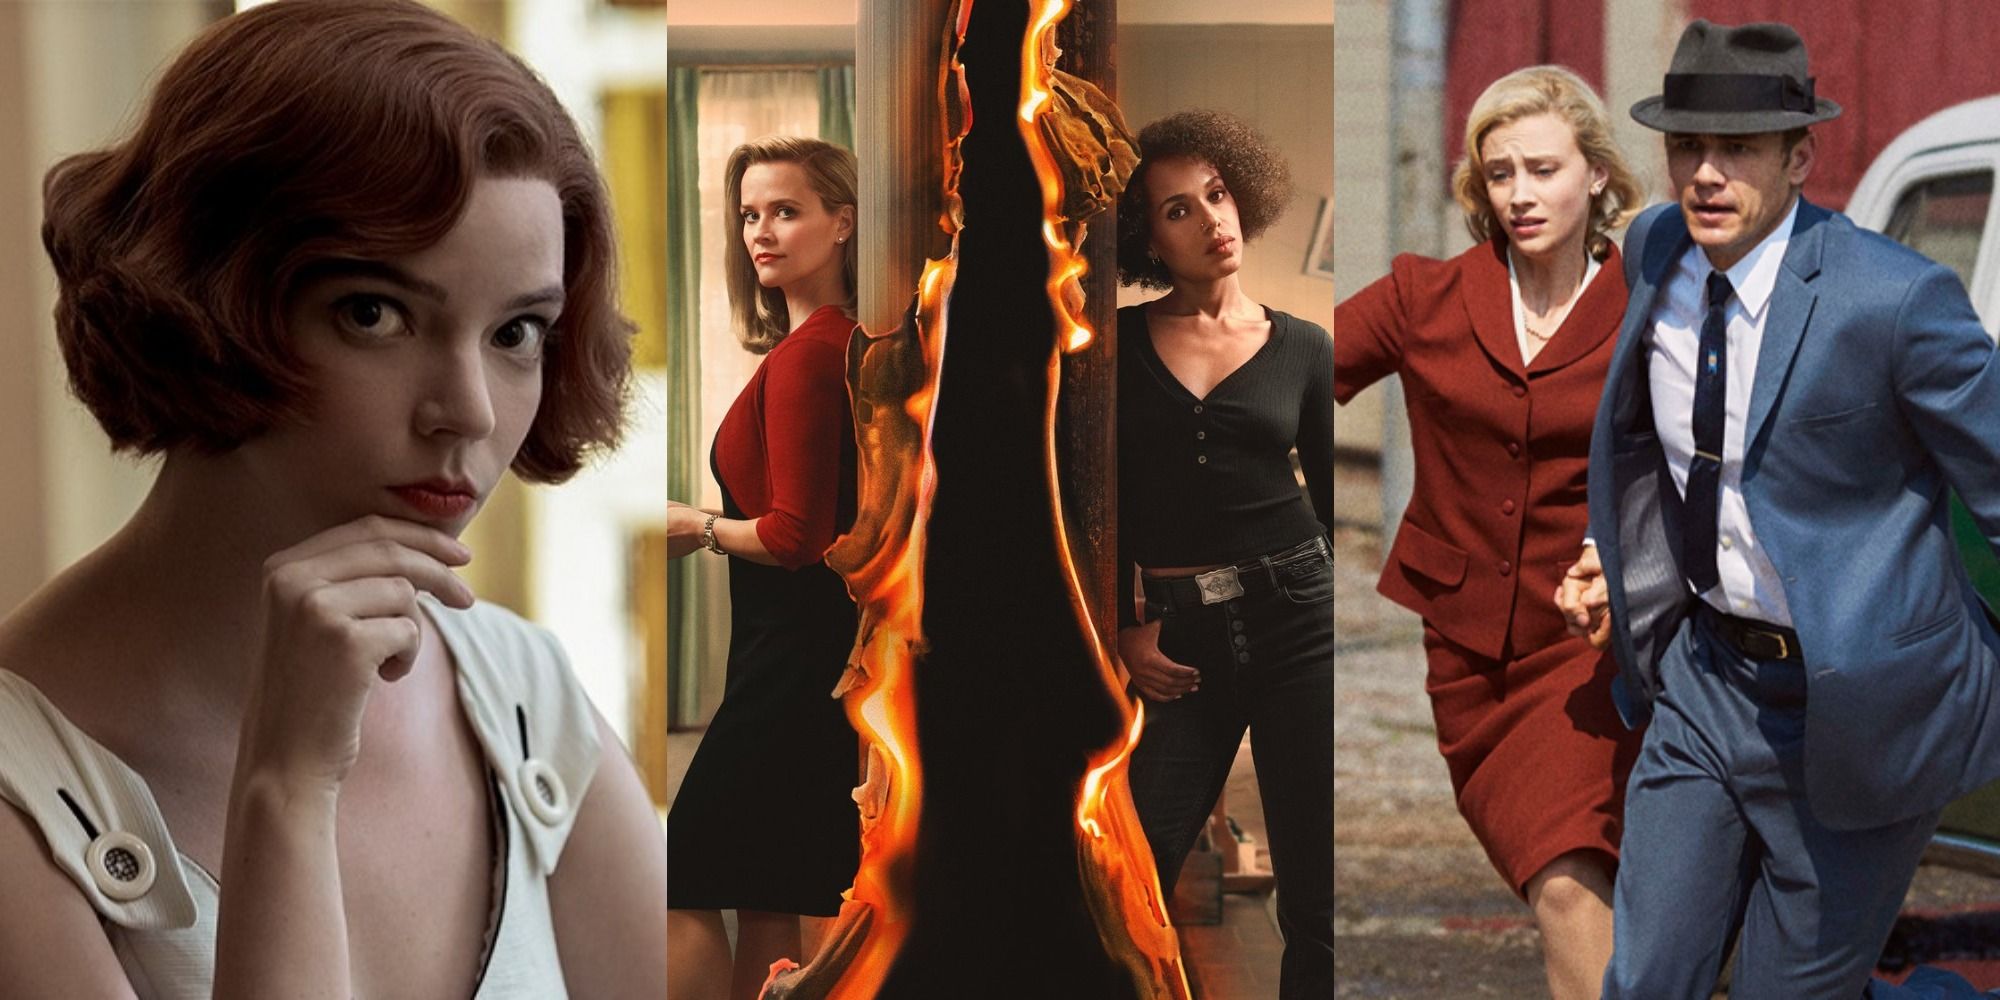 15 Of The Best Miniseries To Binge In A Weekend